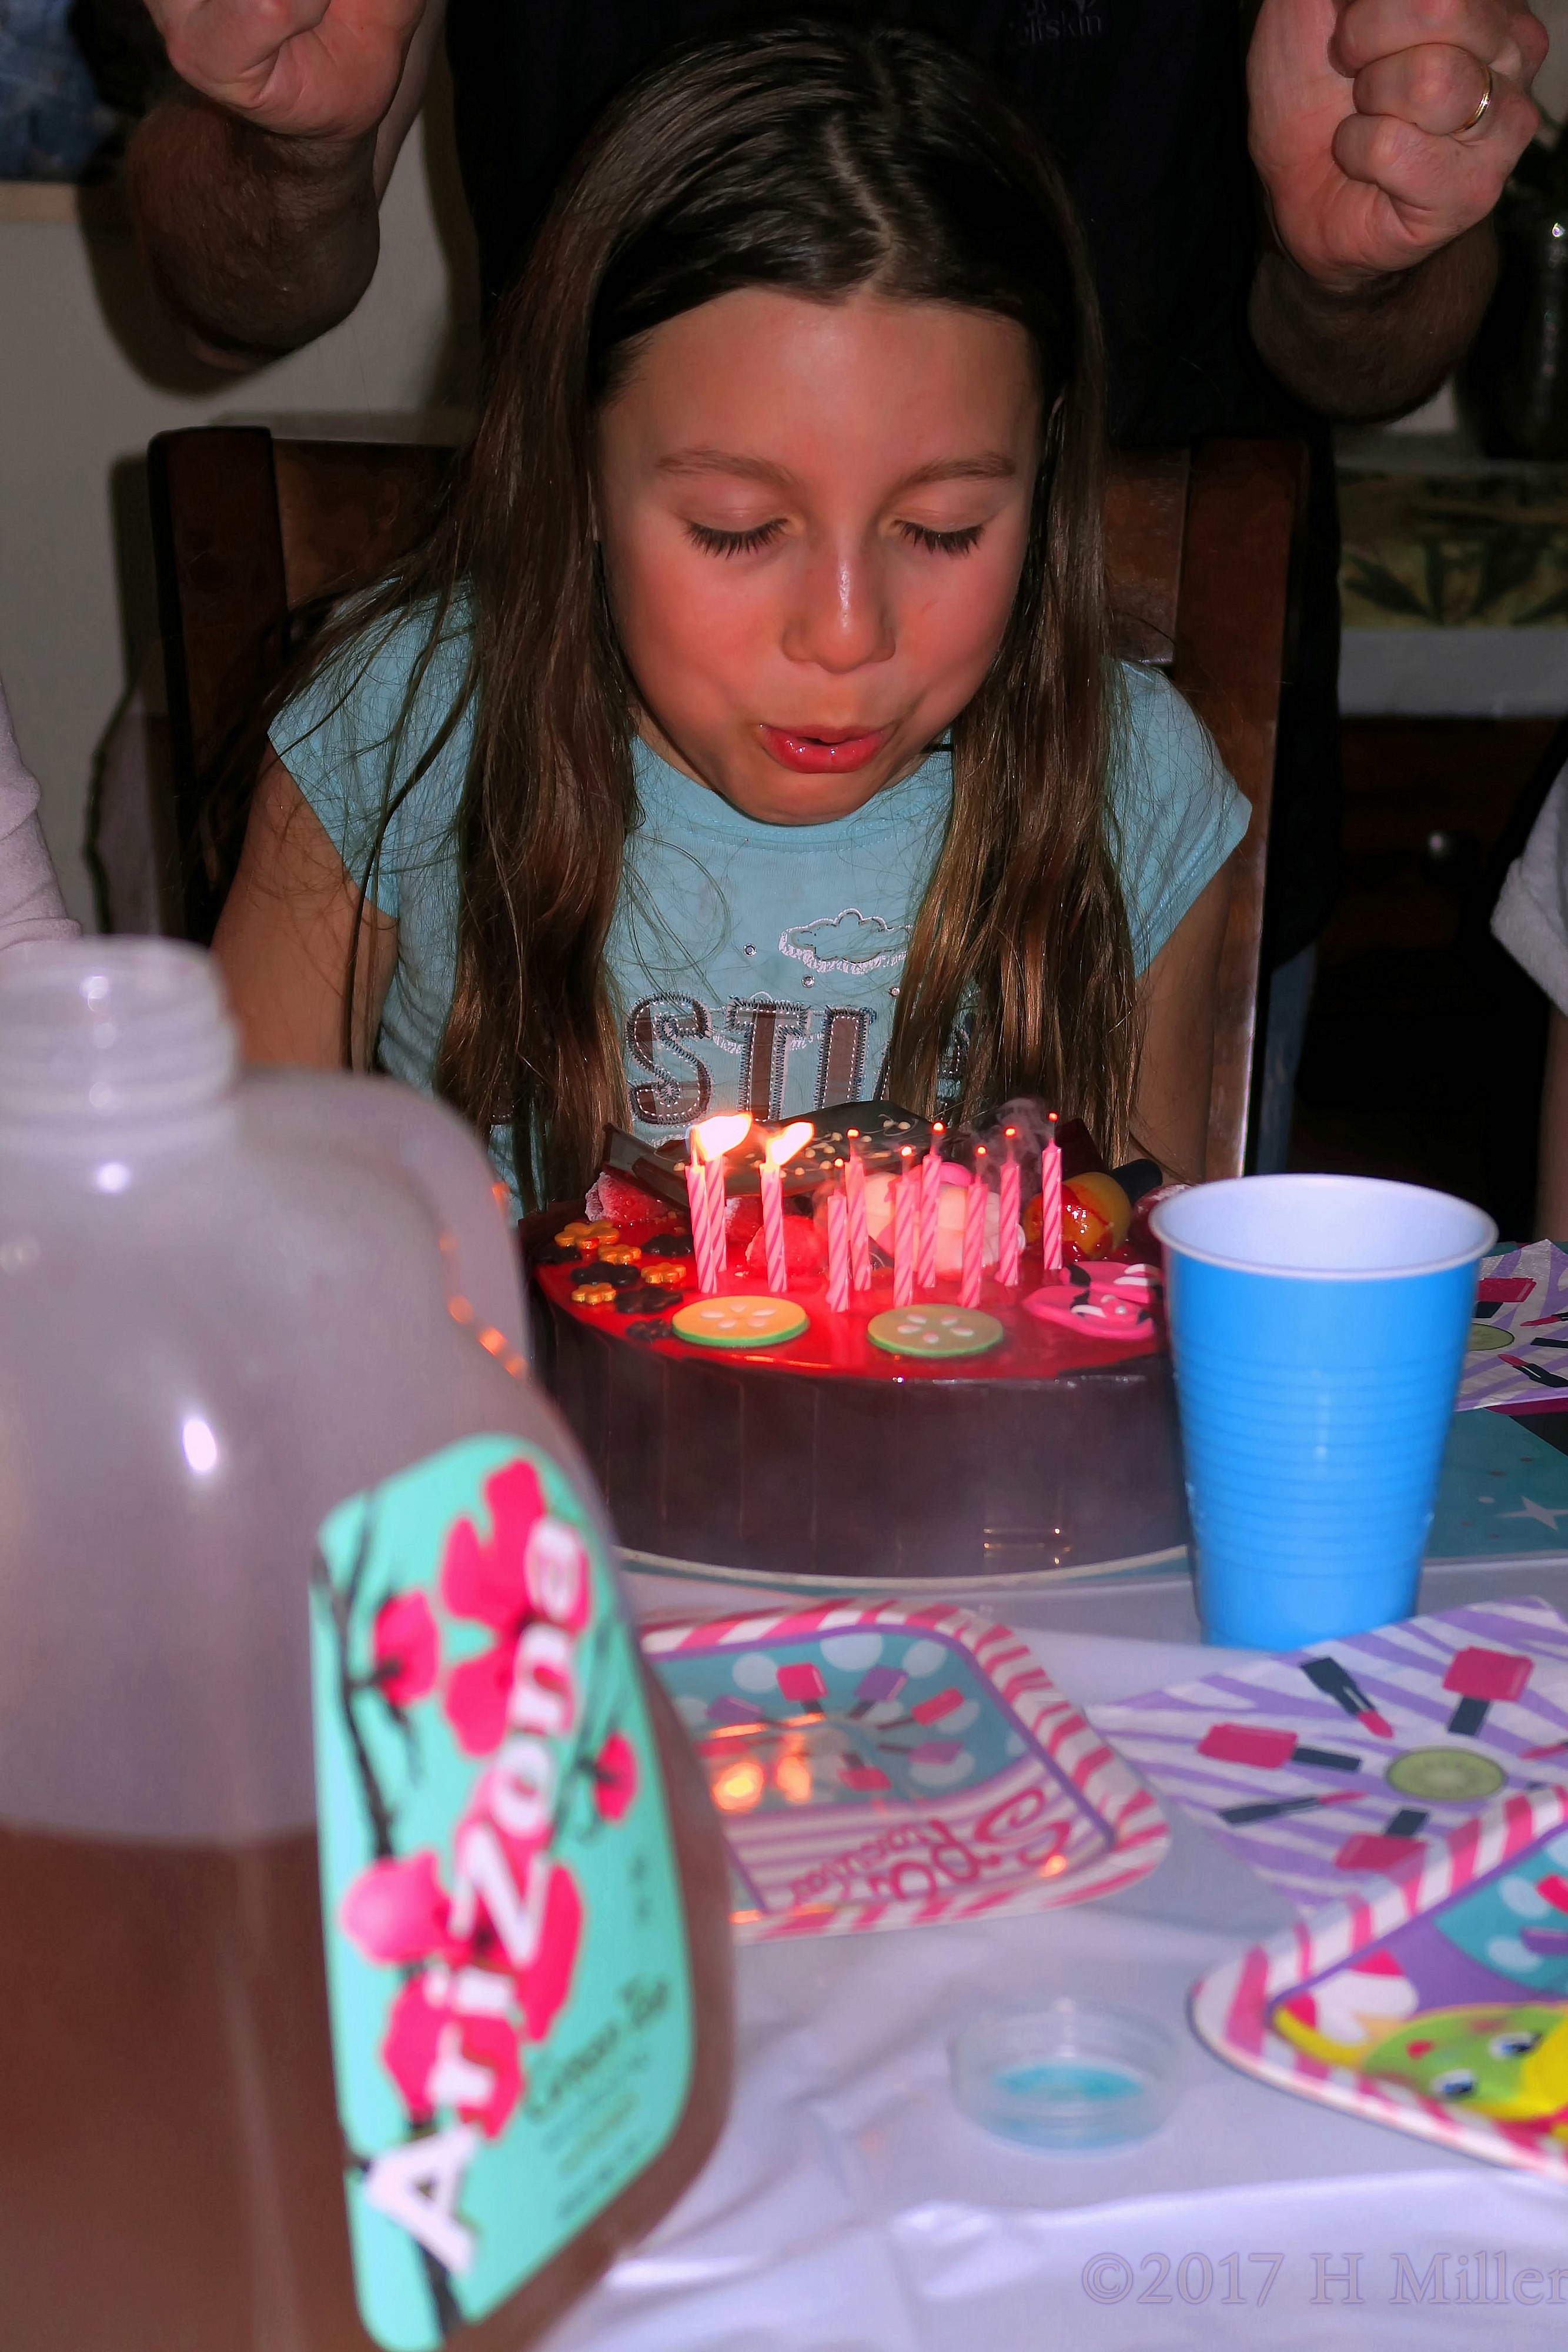 Make A Wish And Blow Out Your Candles Birthday Girl! 